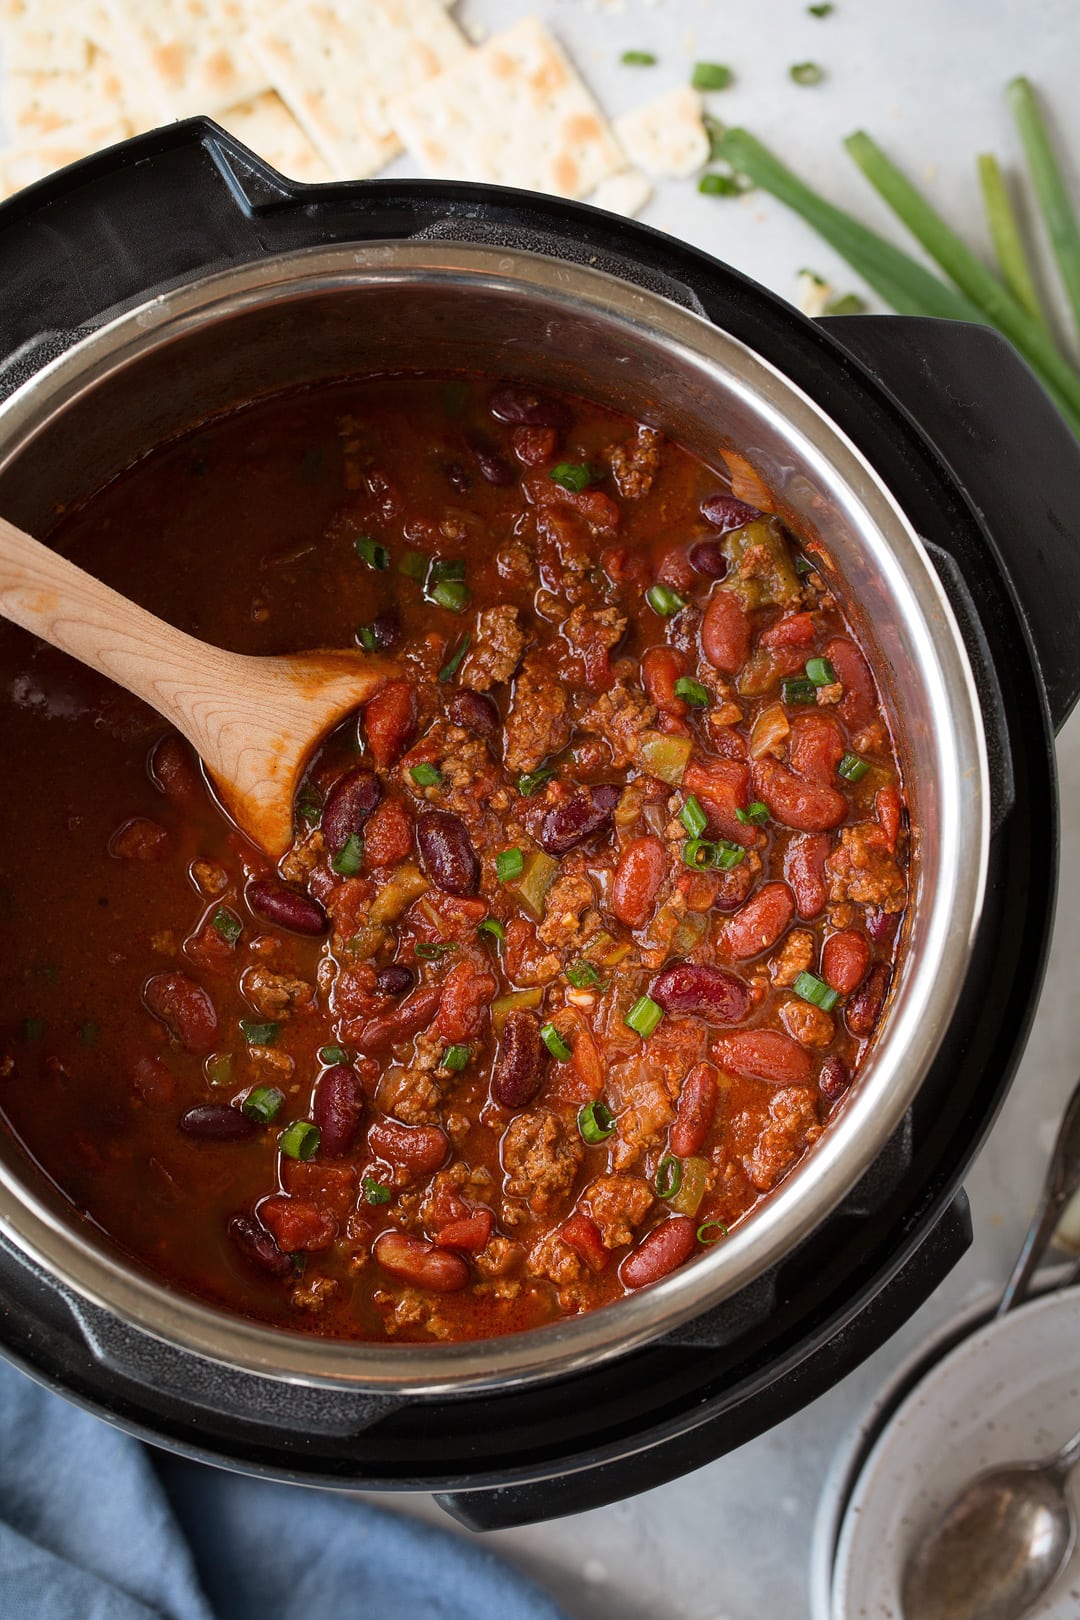 How To Make Chili In Electric Pressure Cooker